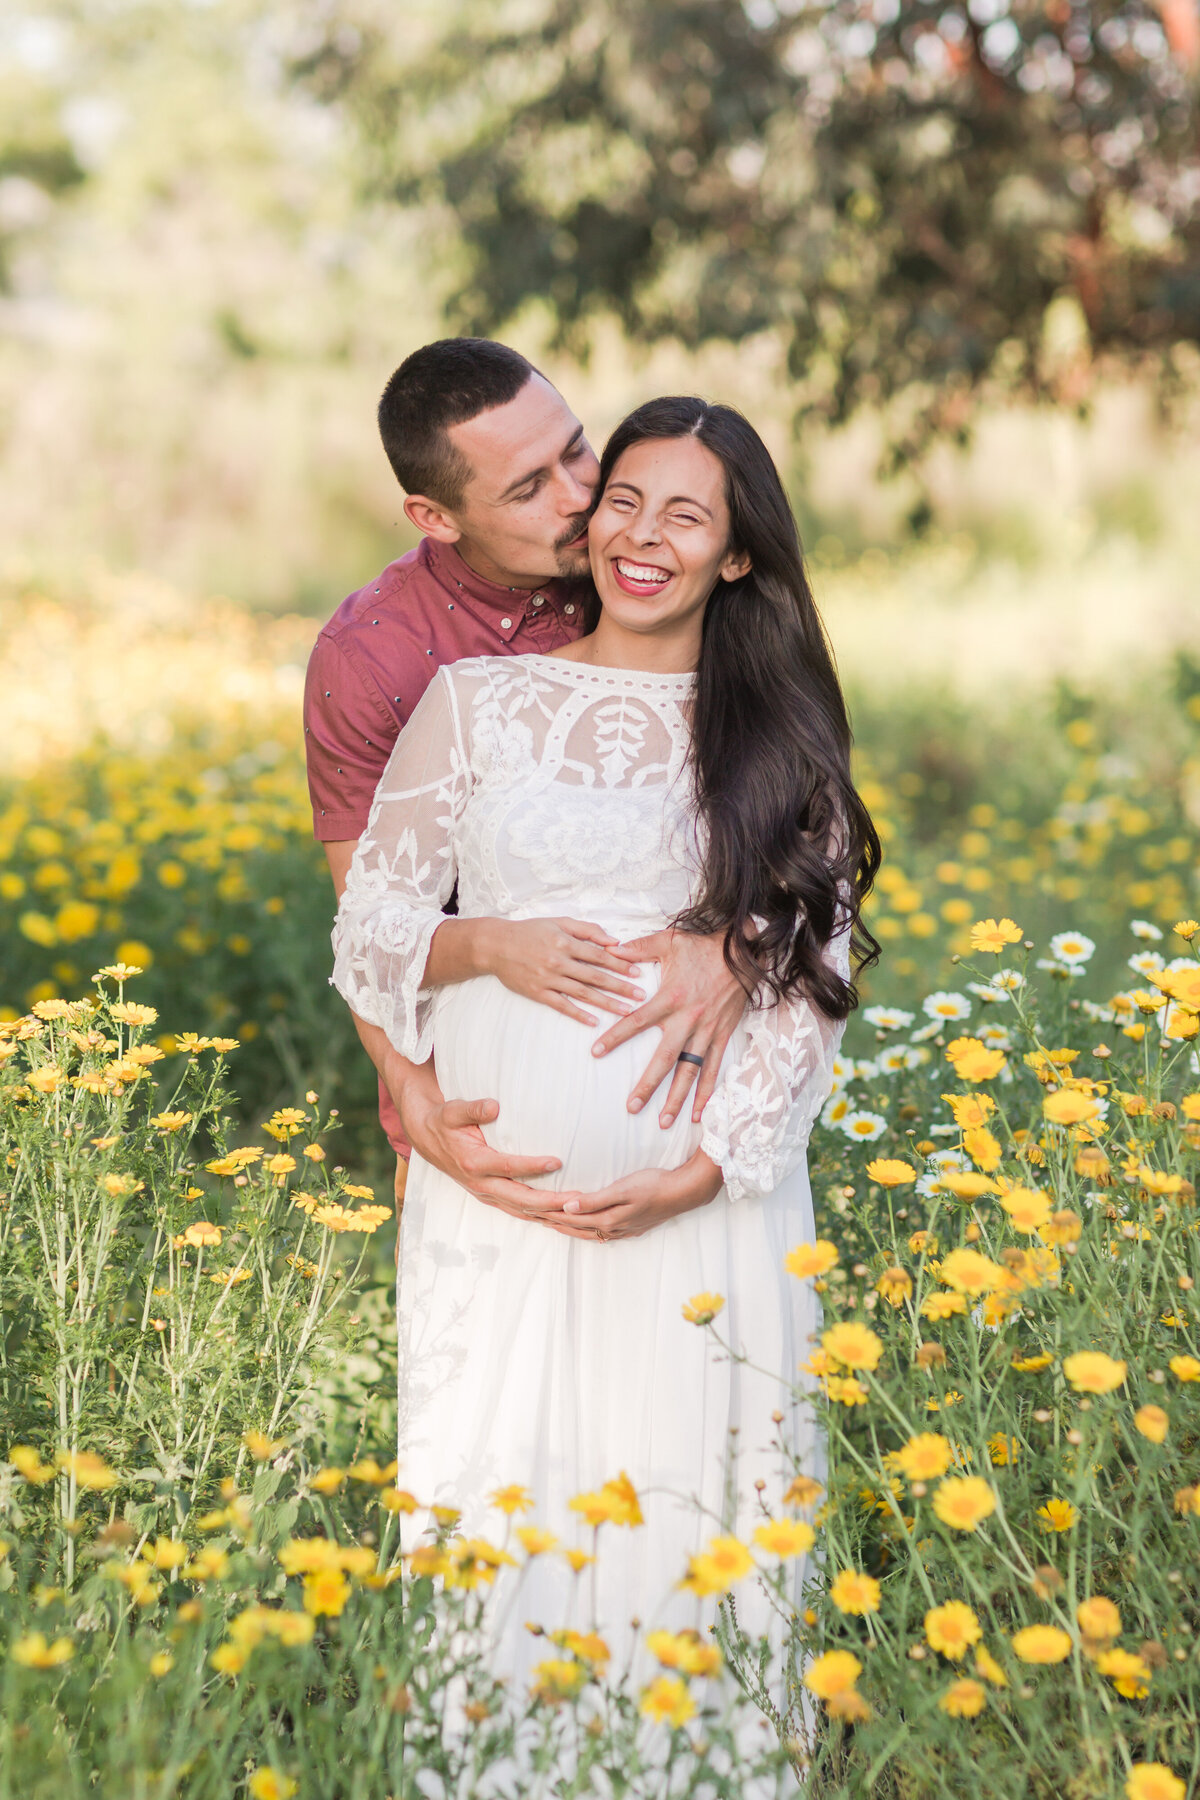 maternity-photography-san-diego-laughing-in-field